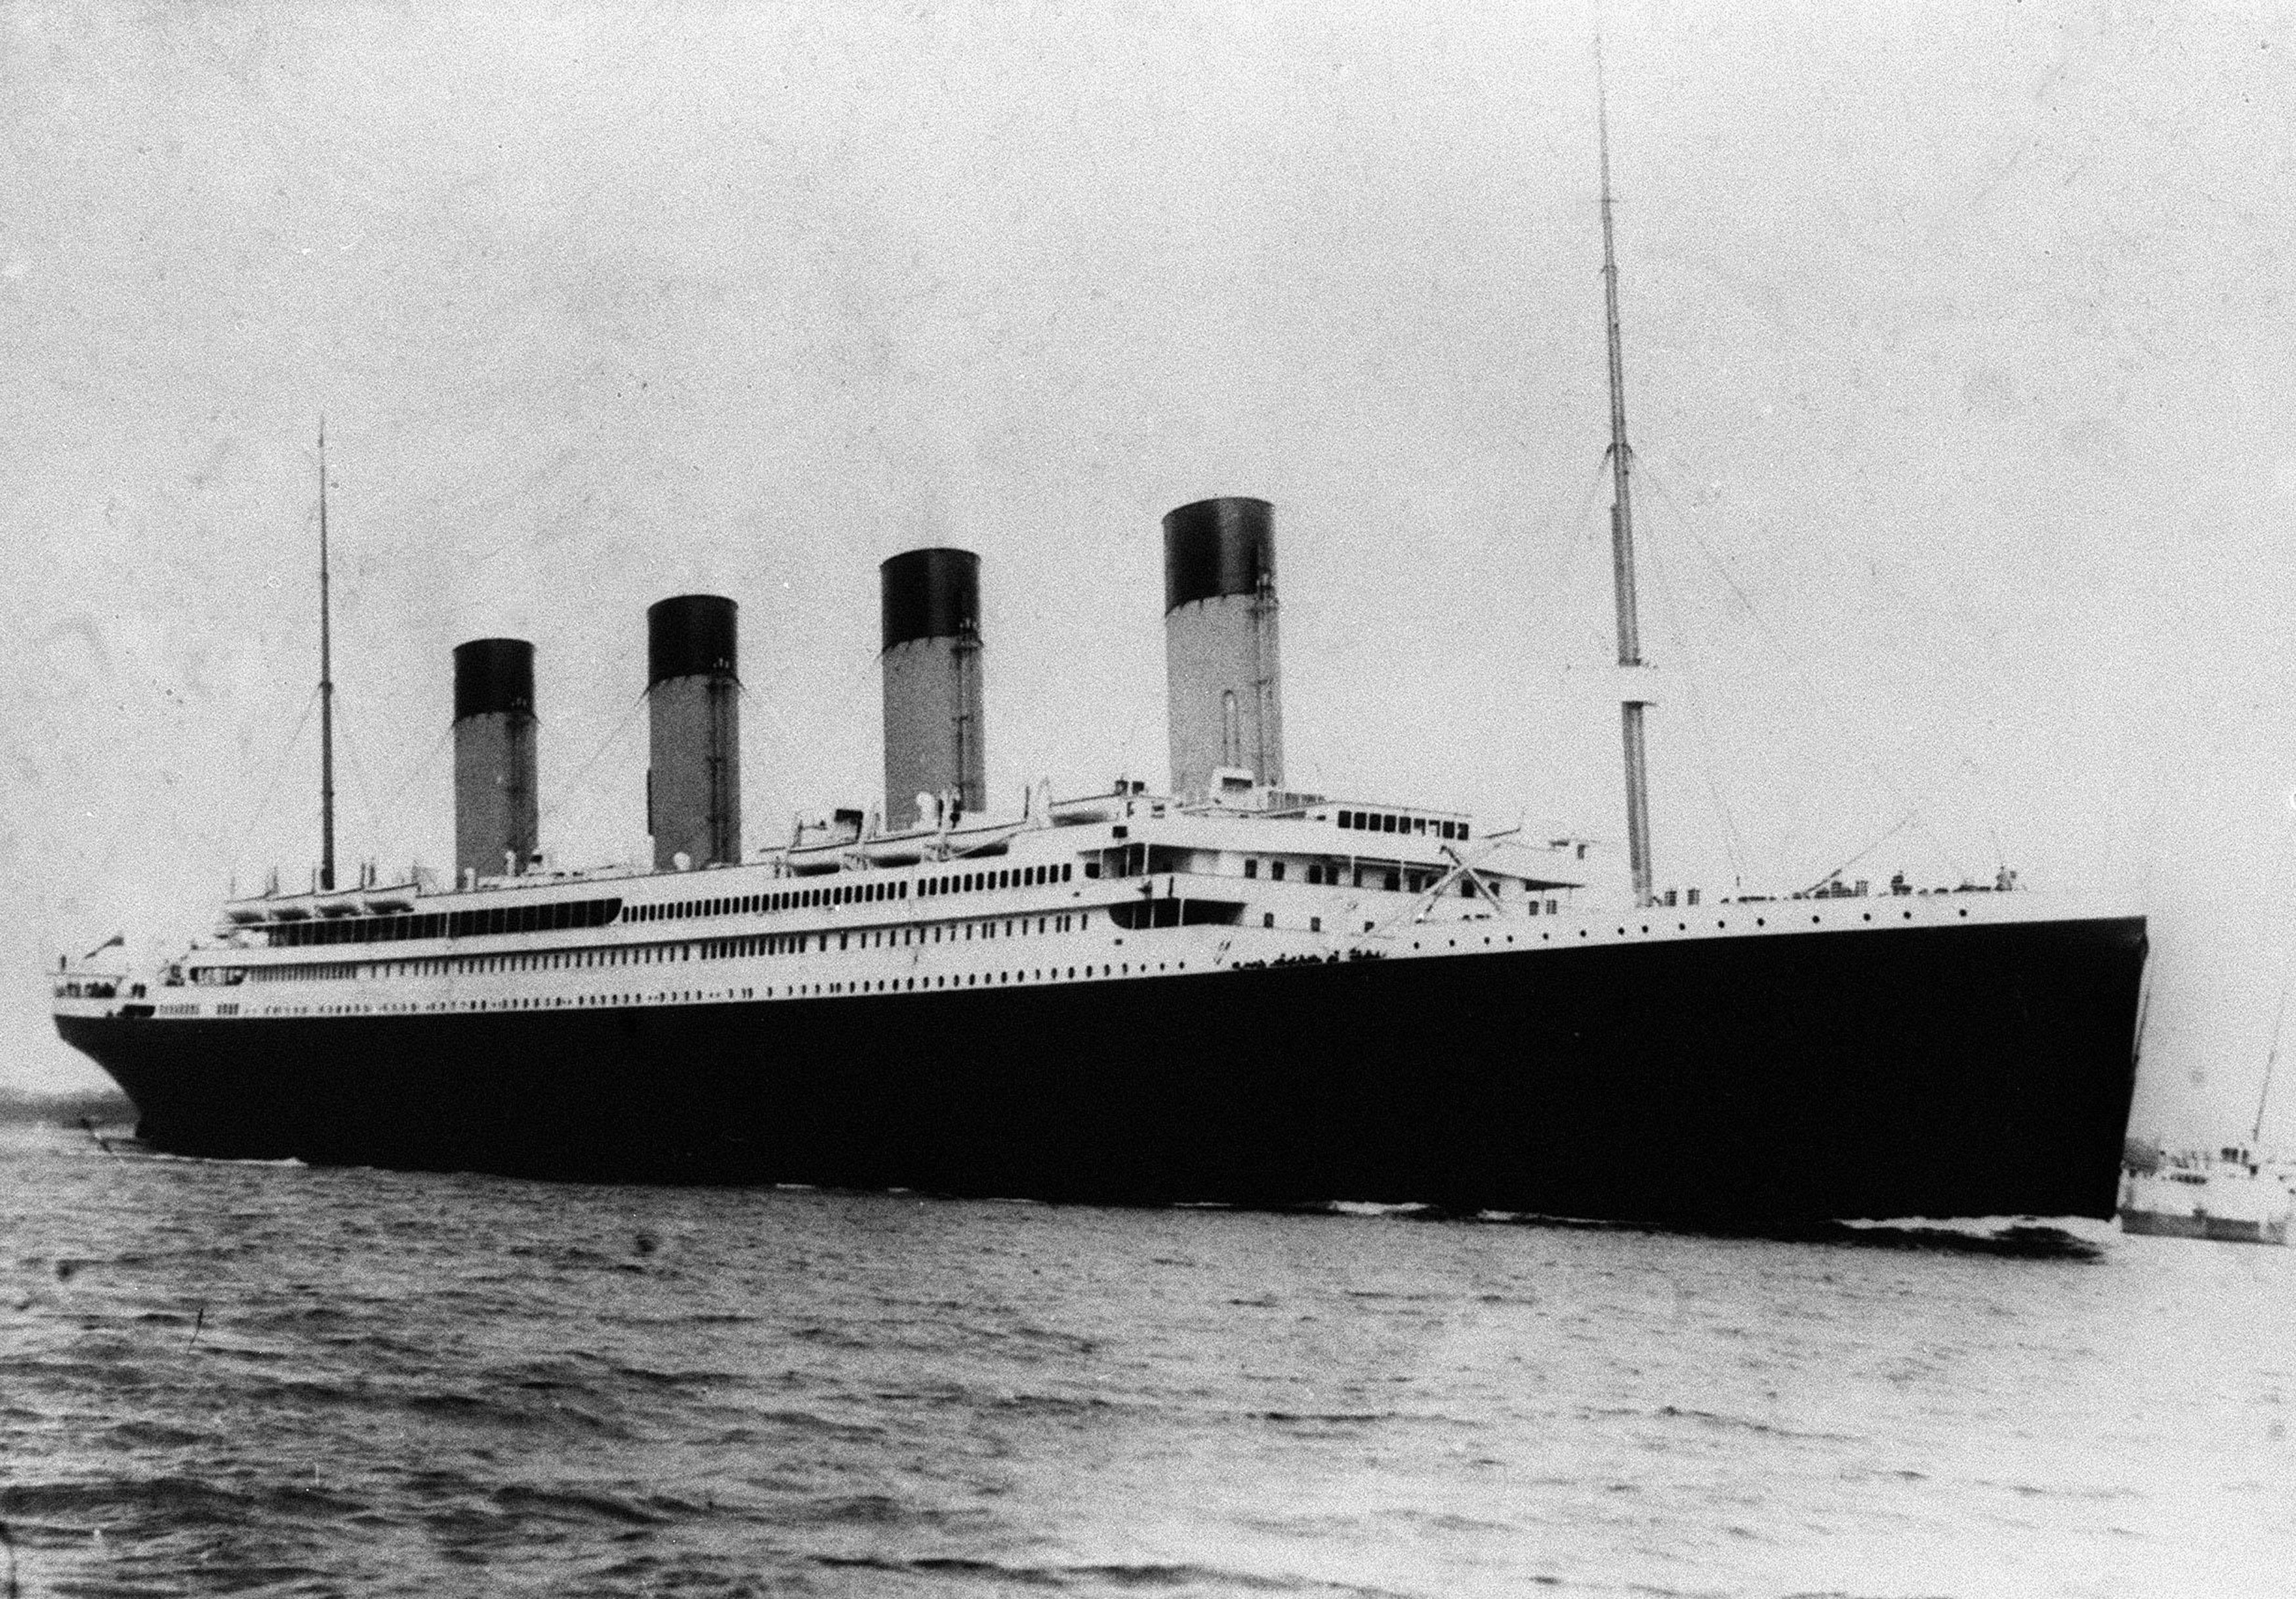 Postcard thought to be earliest discussing sinking of Titanic up for auction  | ITV News Meridian